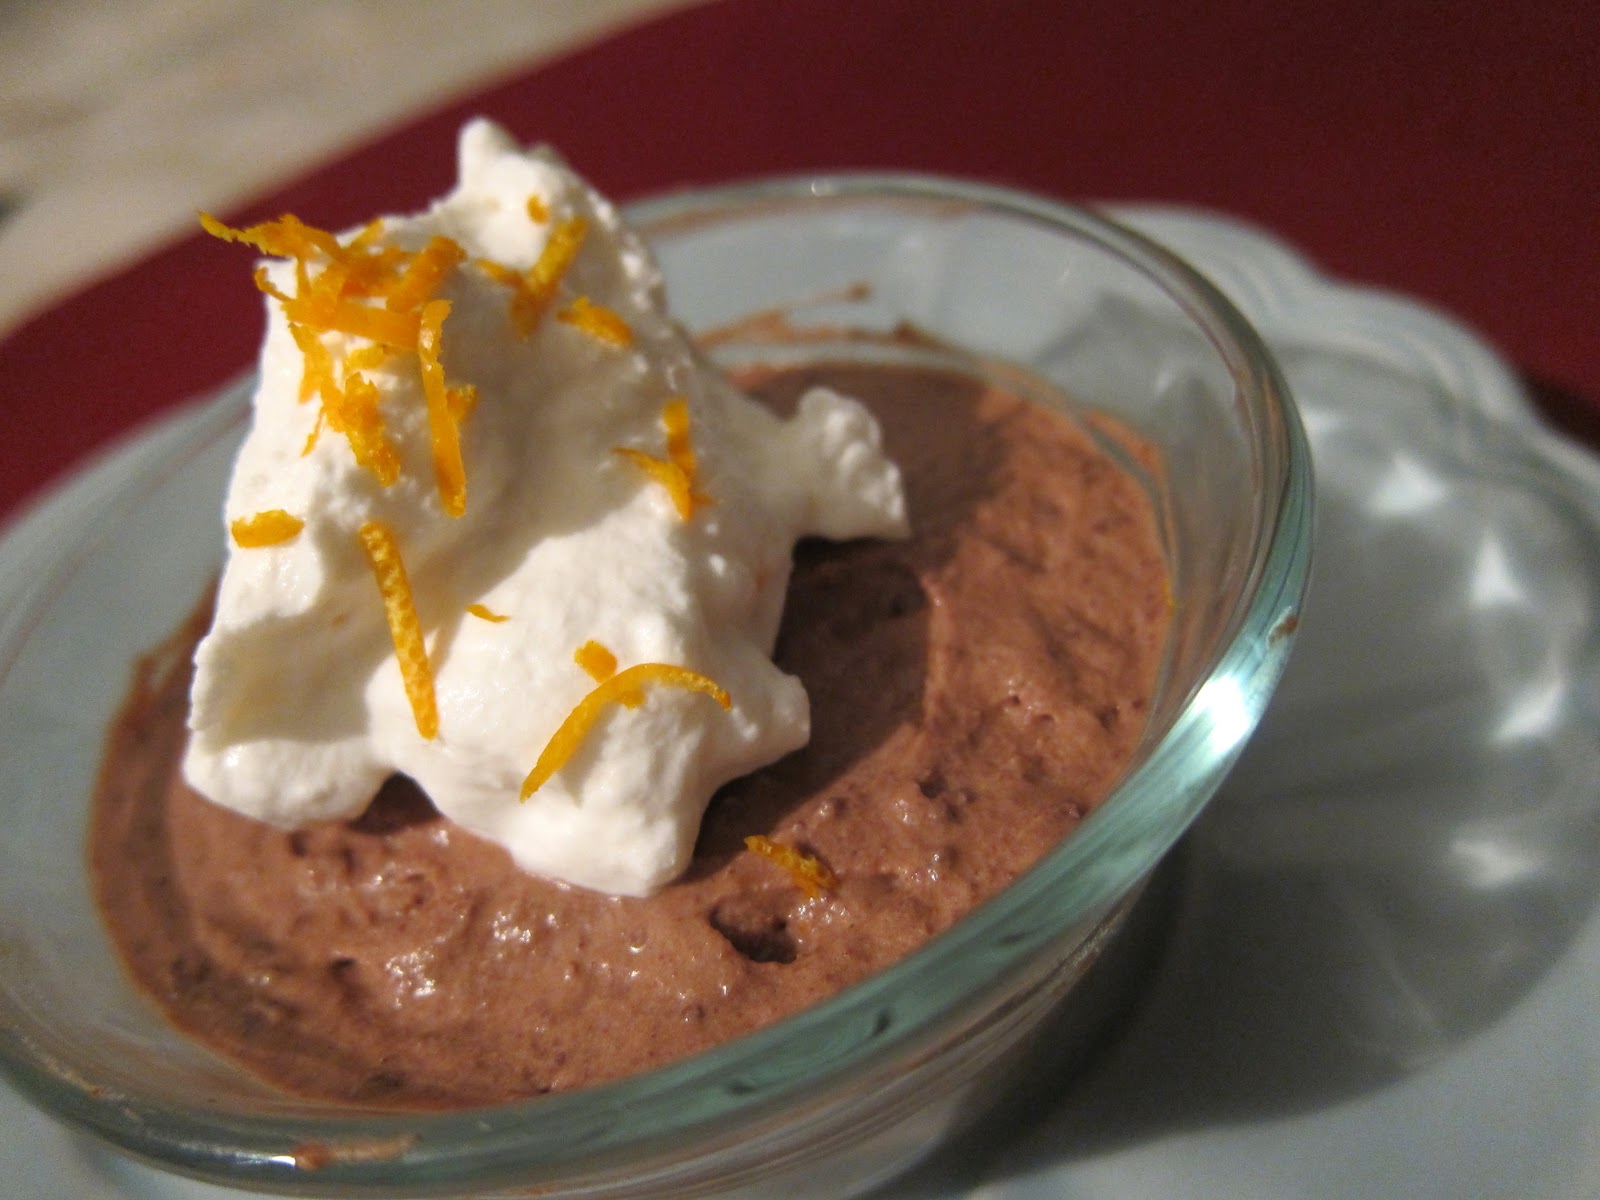 Migrant Kitchen: Chocolate Mousse with Orange-Zested Whipped Cream